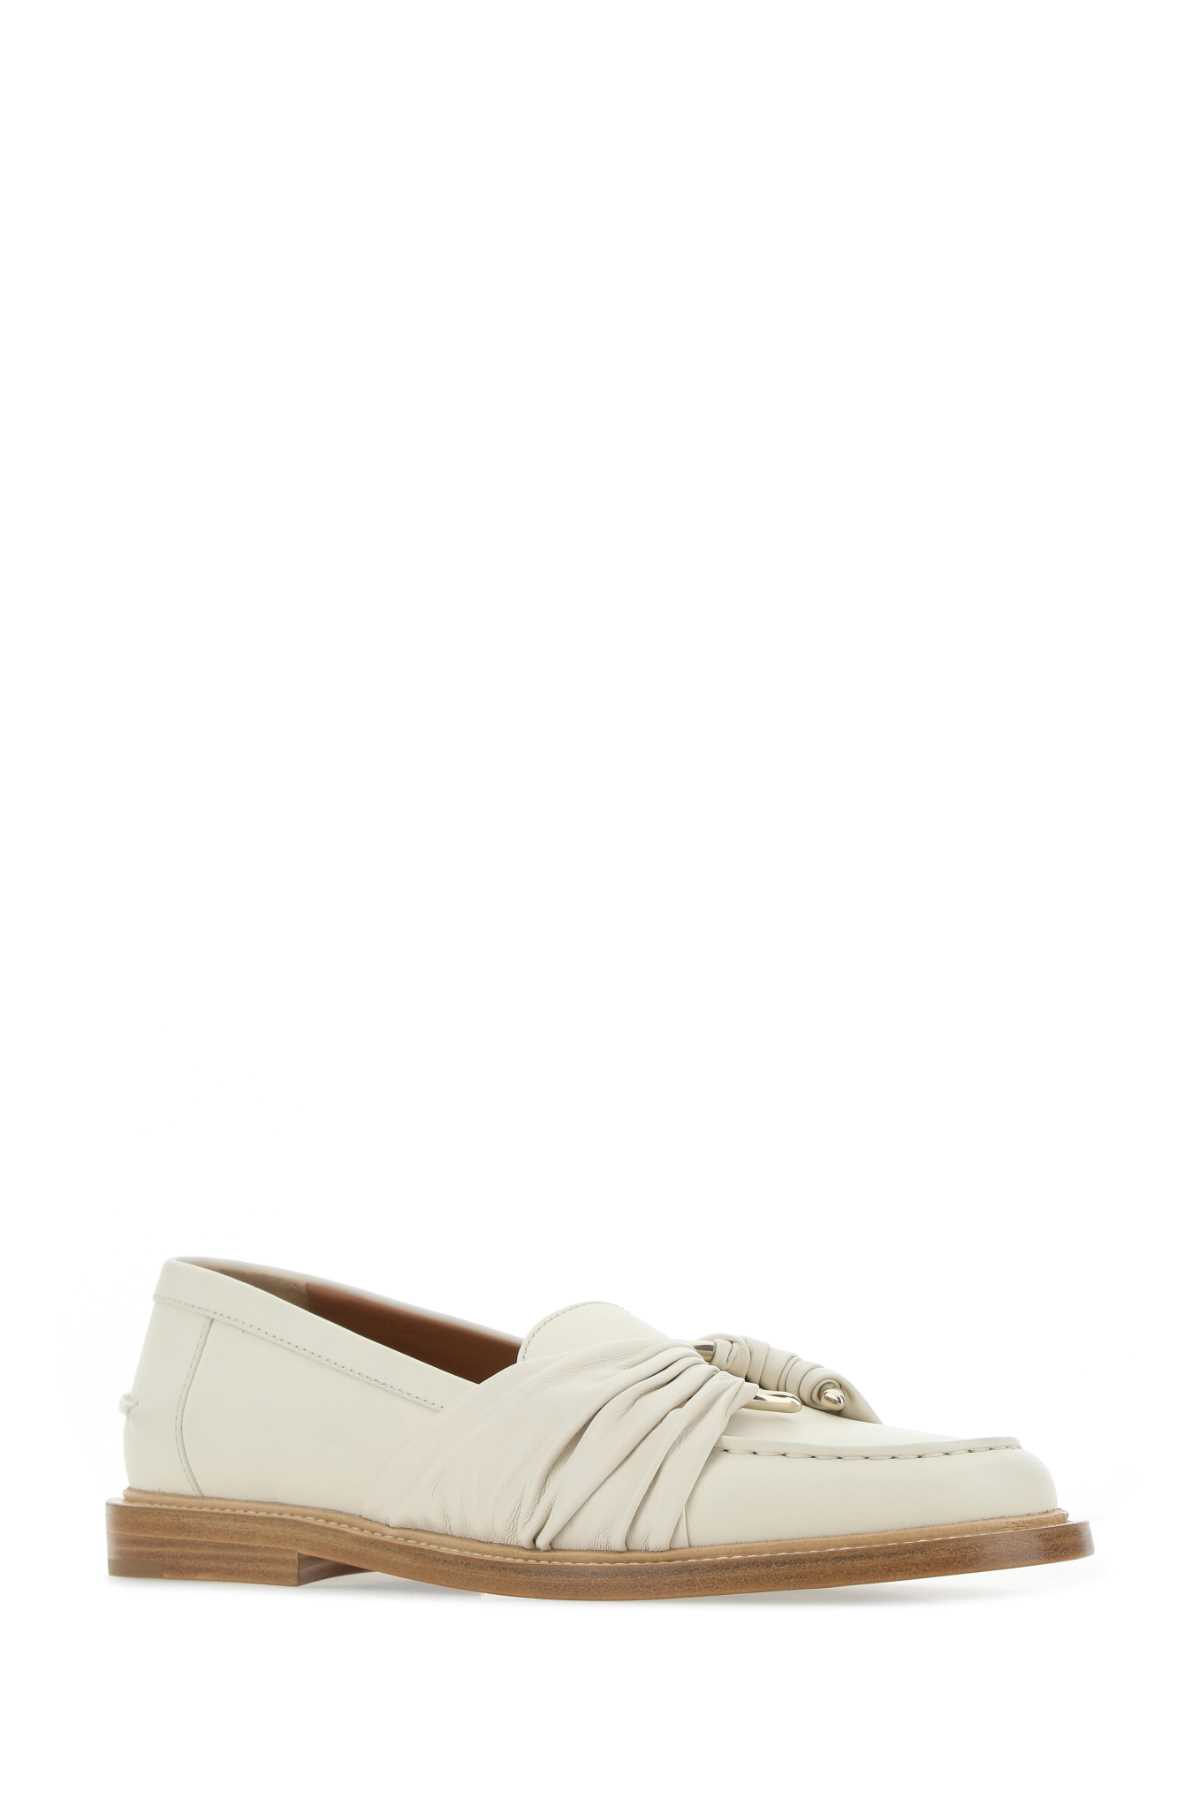 Shop Chloé Ivory Leather Loafers In 122